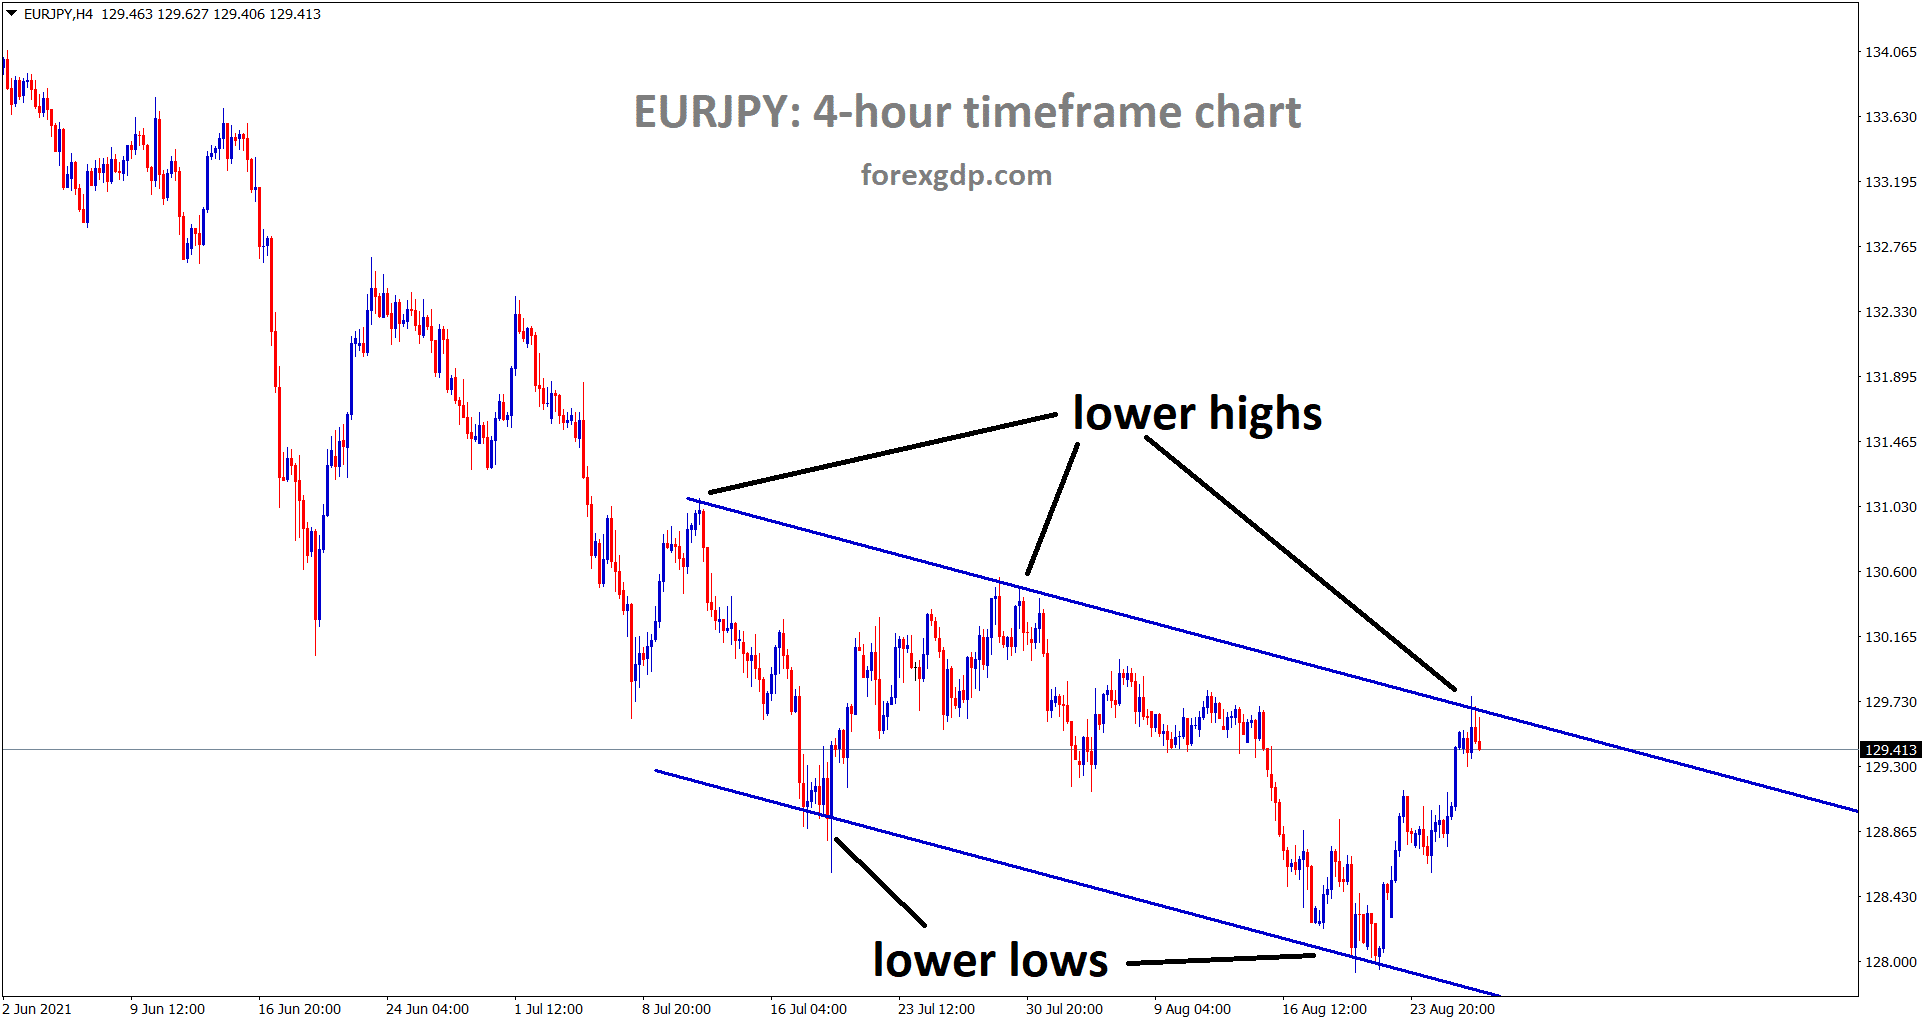 EURJPY is moving in a small descending channel range